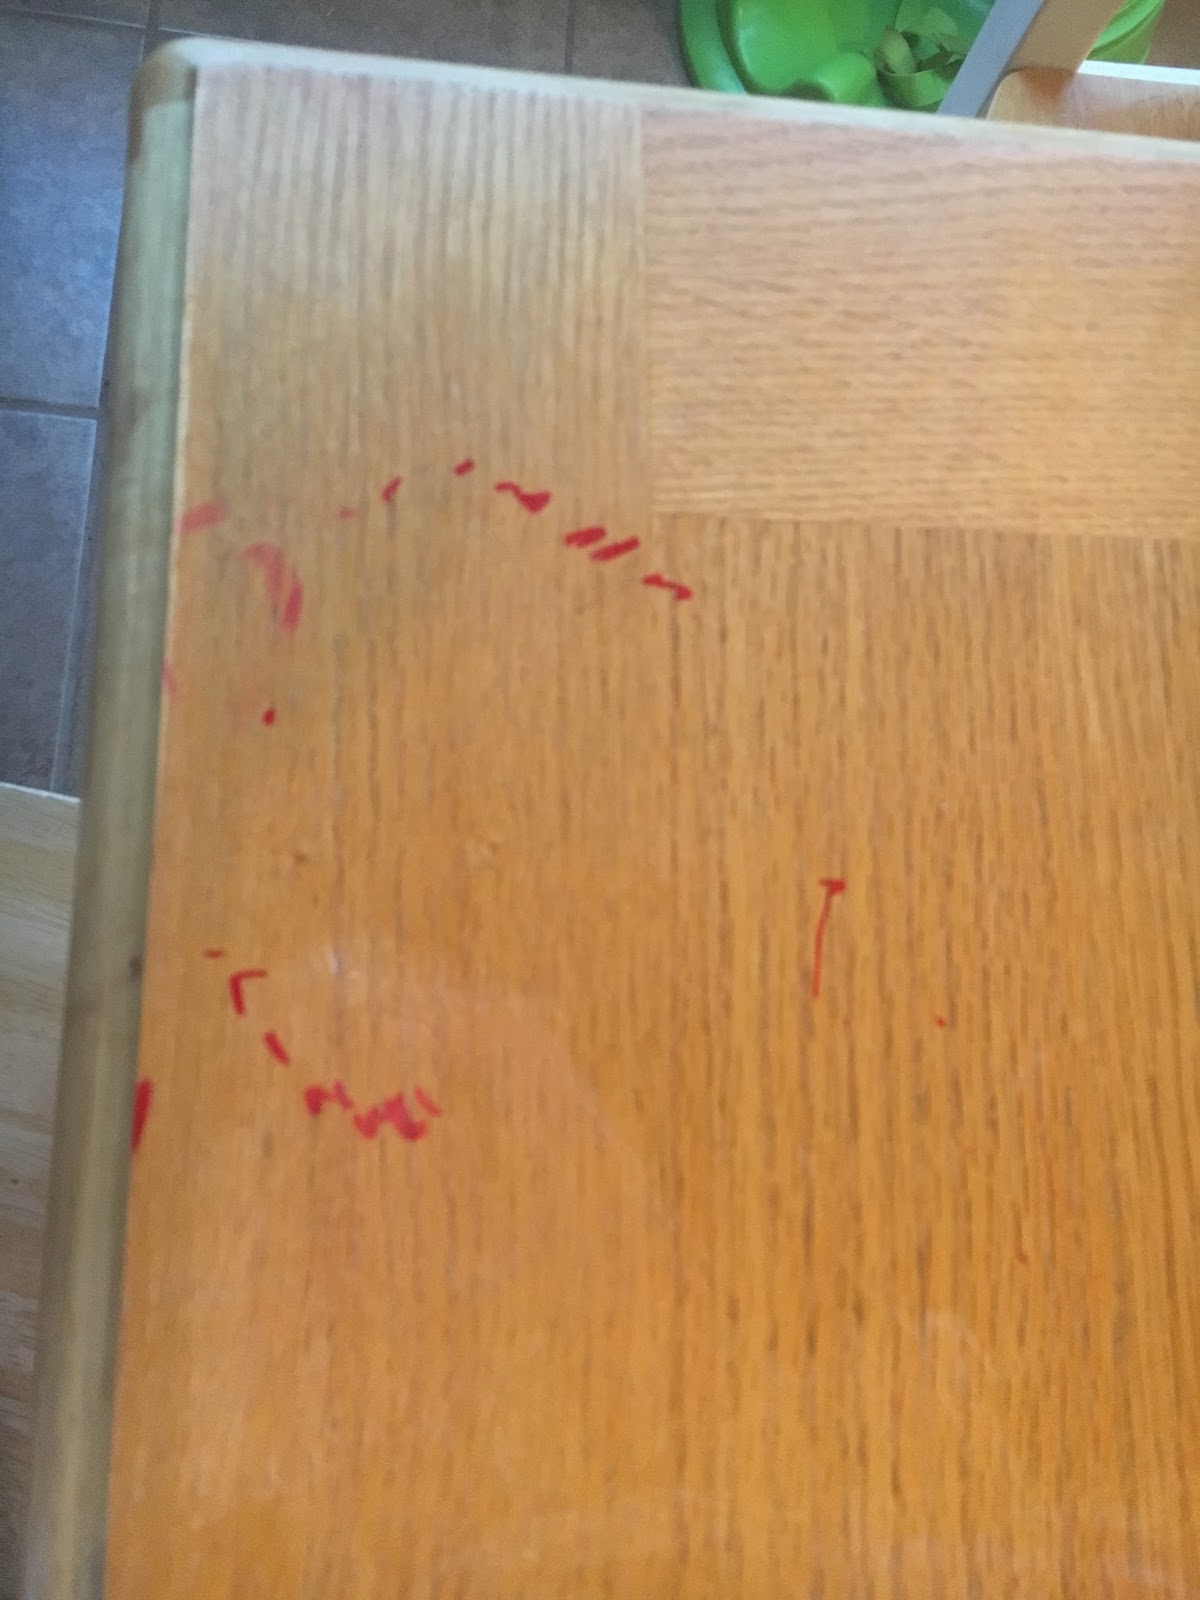 How To Remove Permanent Marker From, How To Remove Permanent Marker From Laminate Wood Flooring